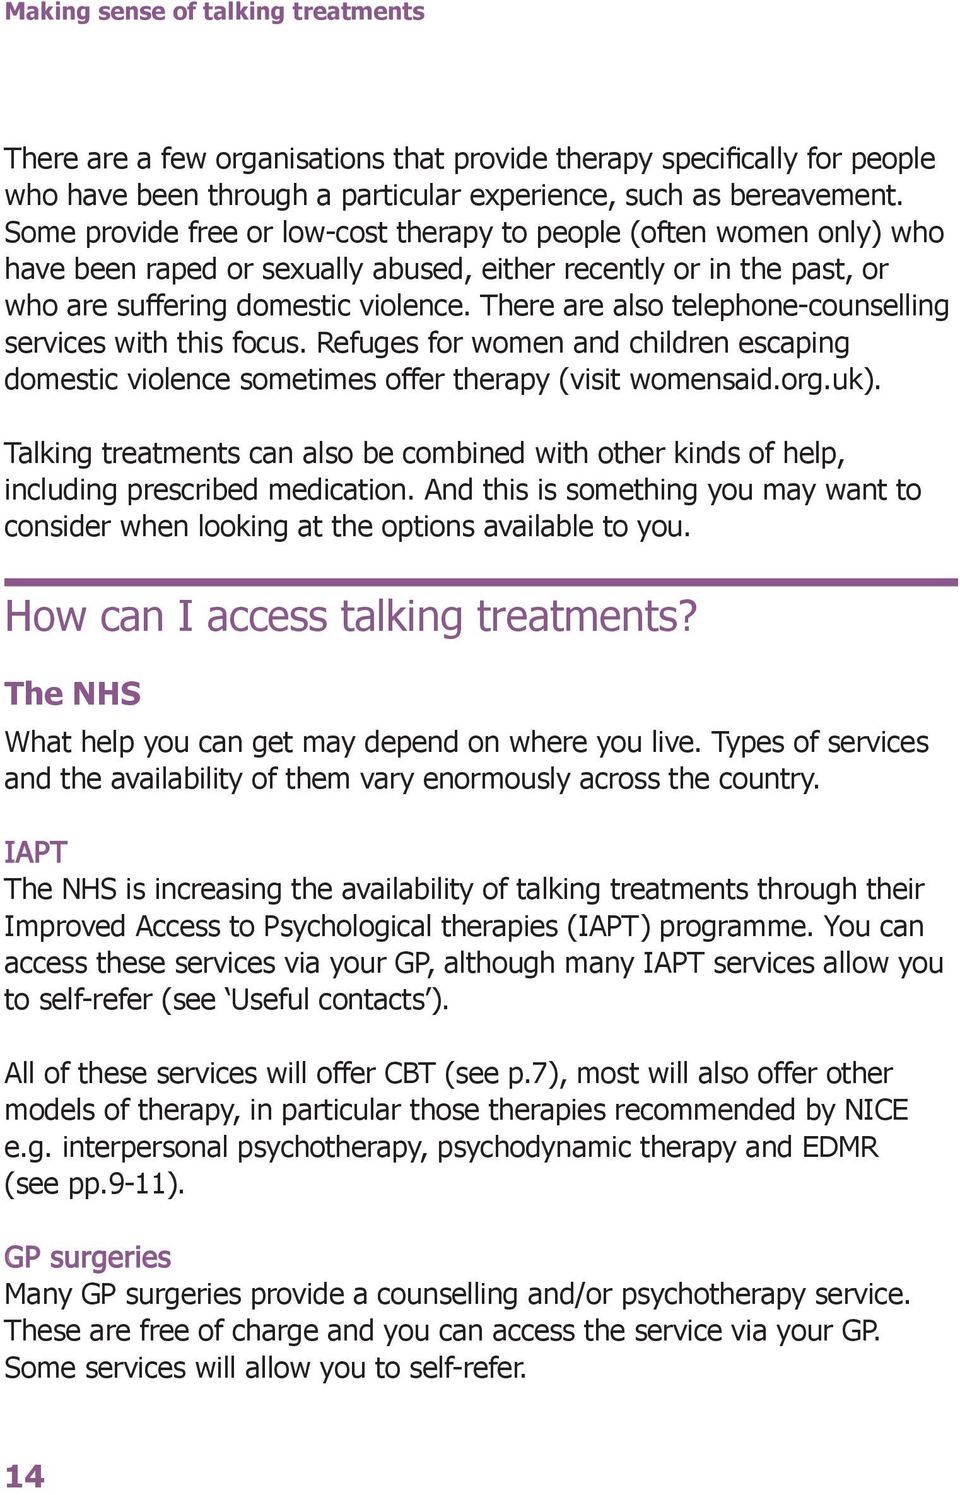 There are also telephone-counselling services with this focus. Refuges for women and children escaping domestic violence sometimes offer therapy (visit womensaid.org.uk).